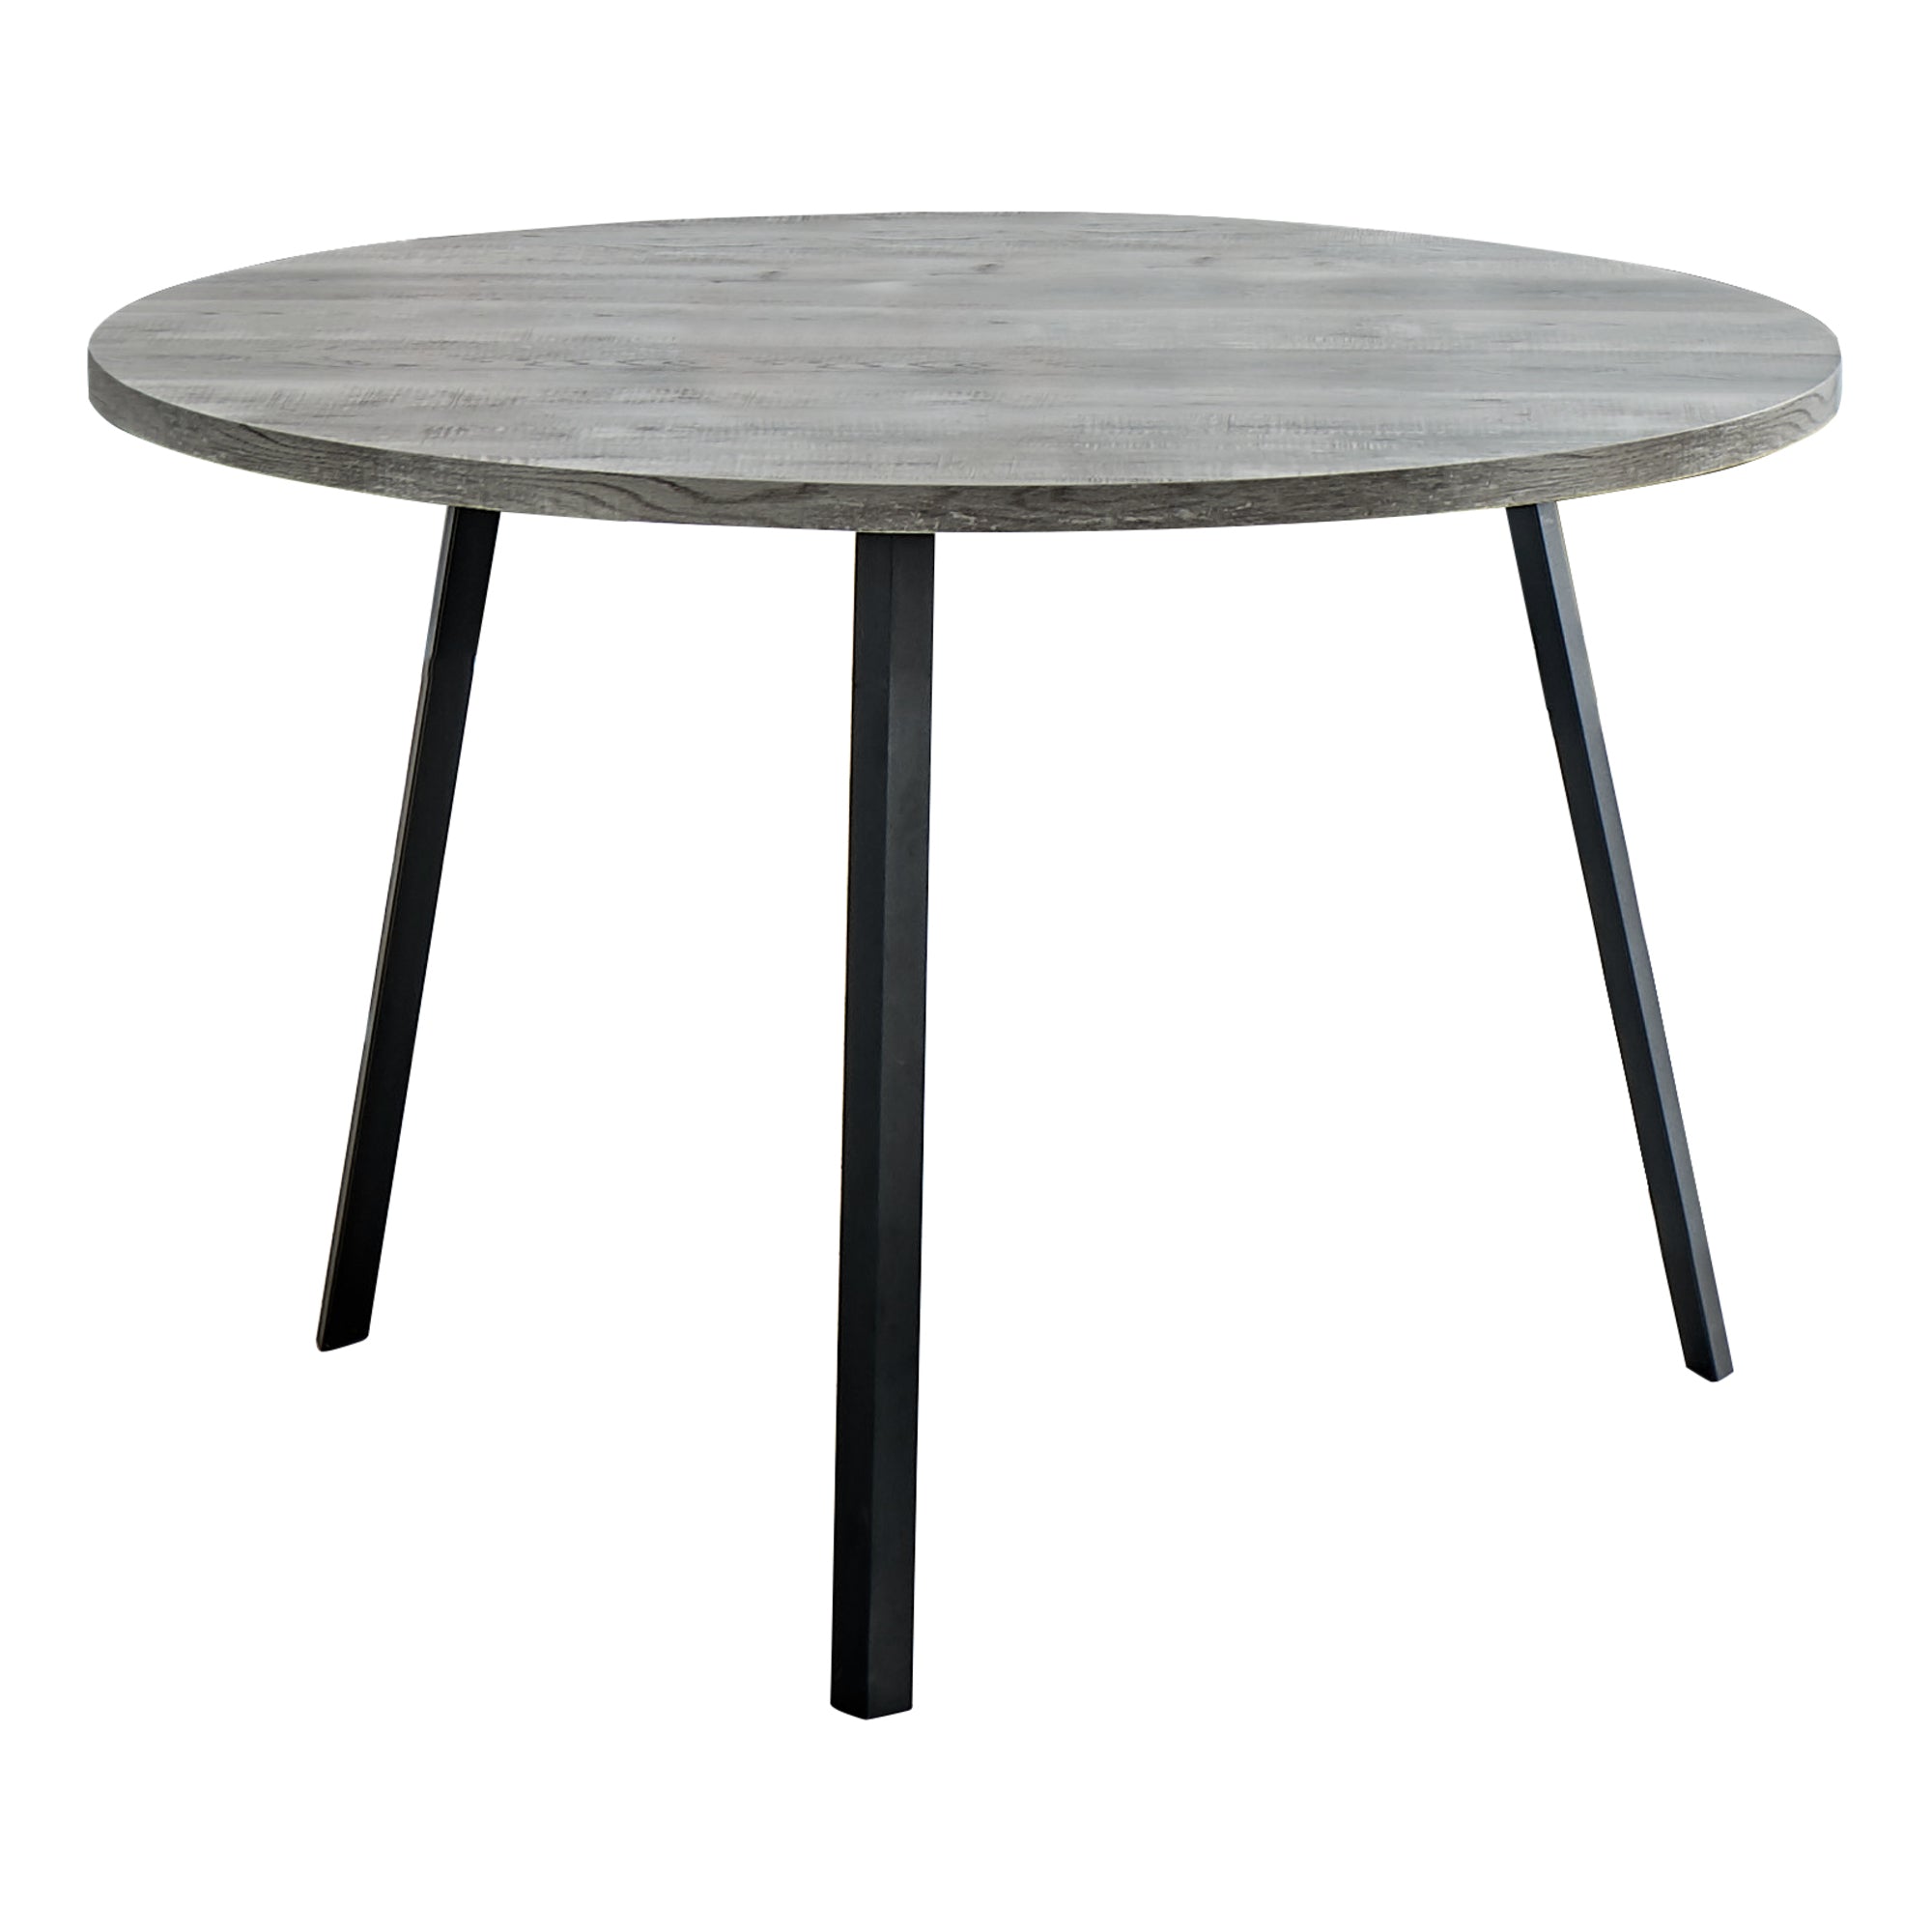 48" Round Dining Room Table With Grey Reclaimed Wood And Black Metal